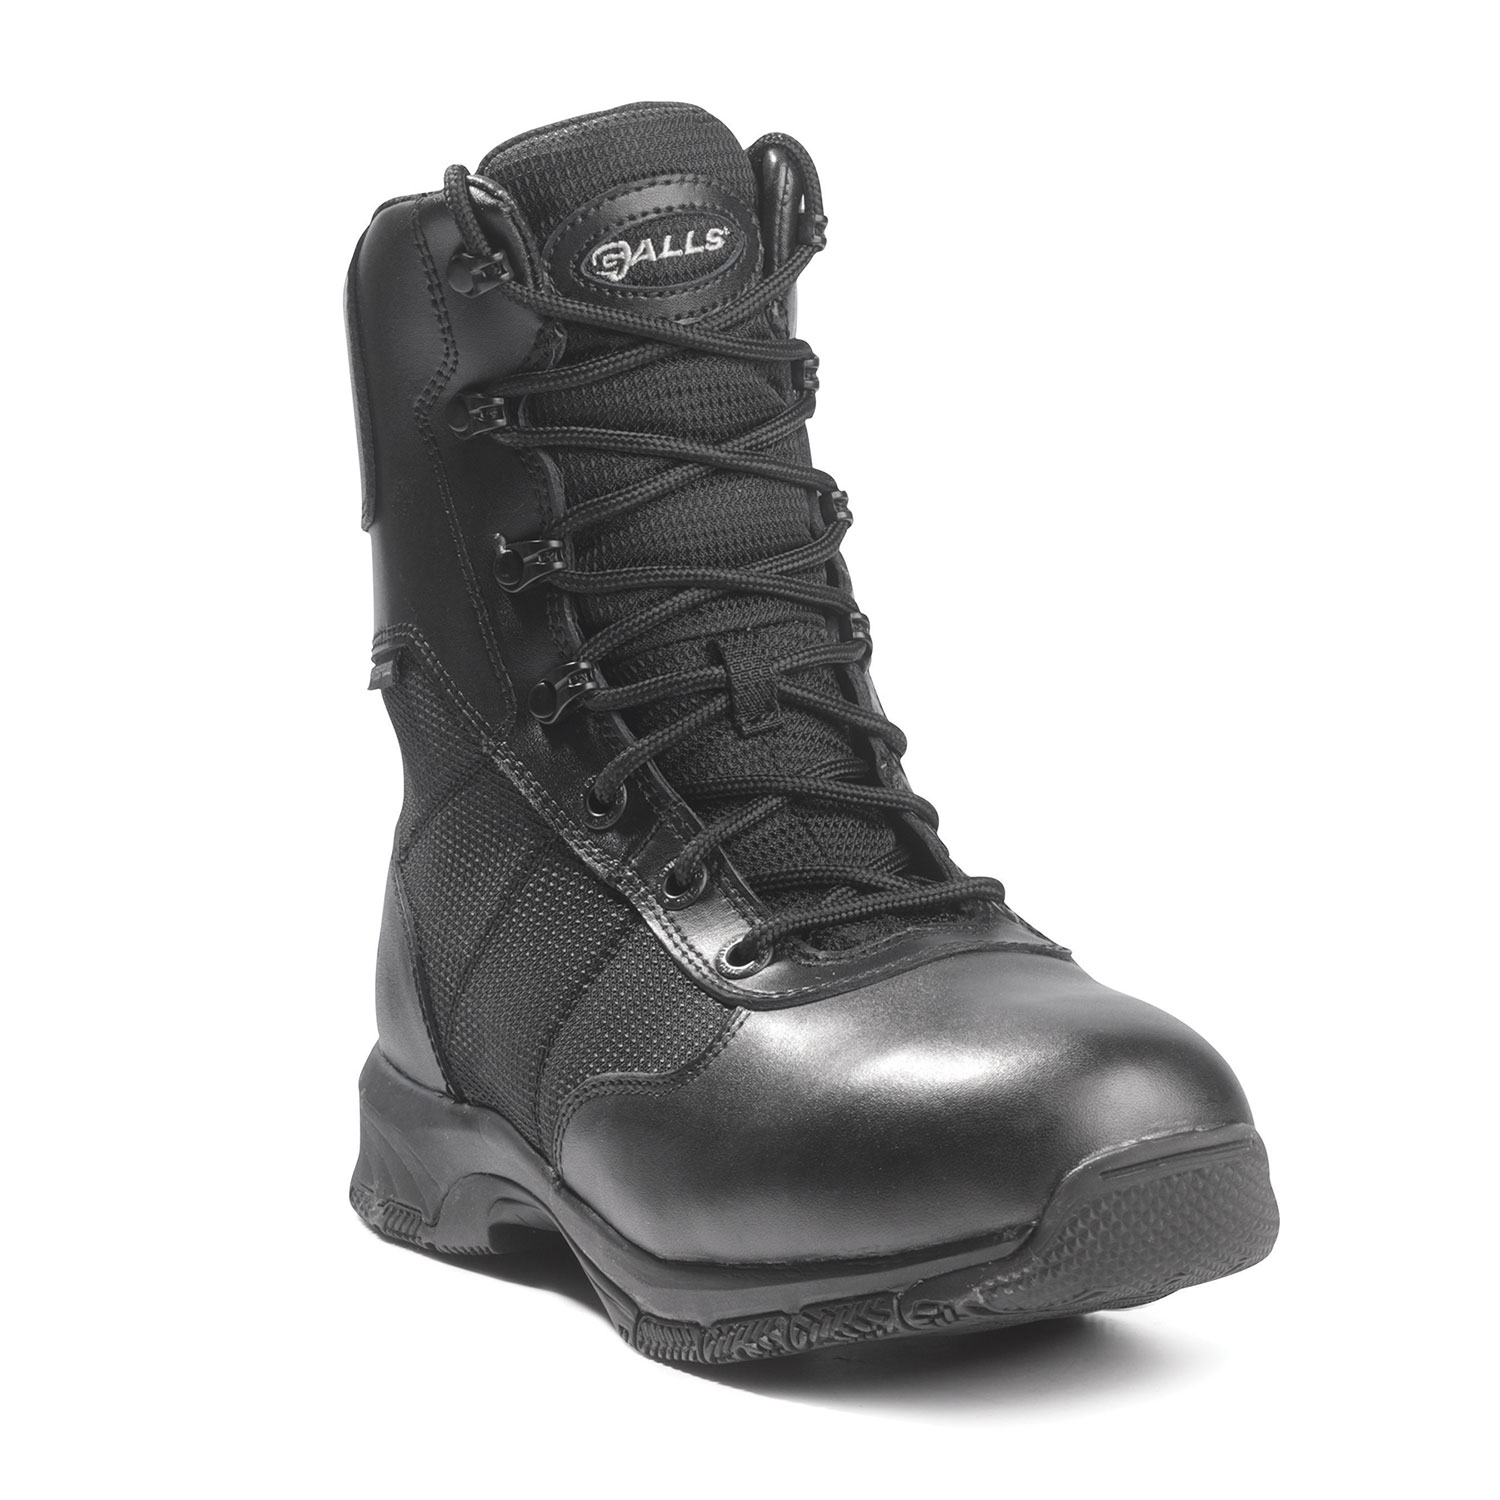 Galls G-TAC Athletic 8 inch SZ WP Boot with Polishable Toe